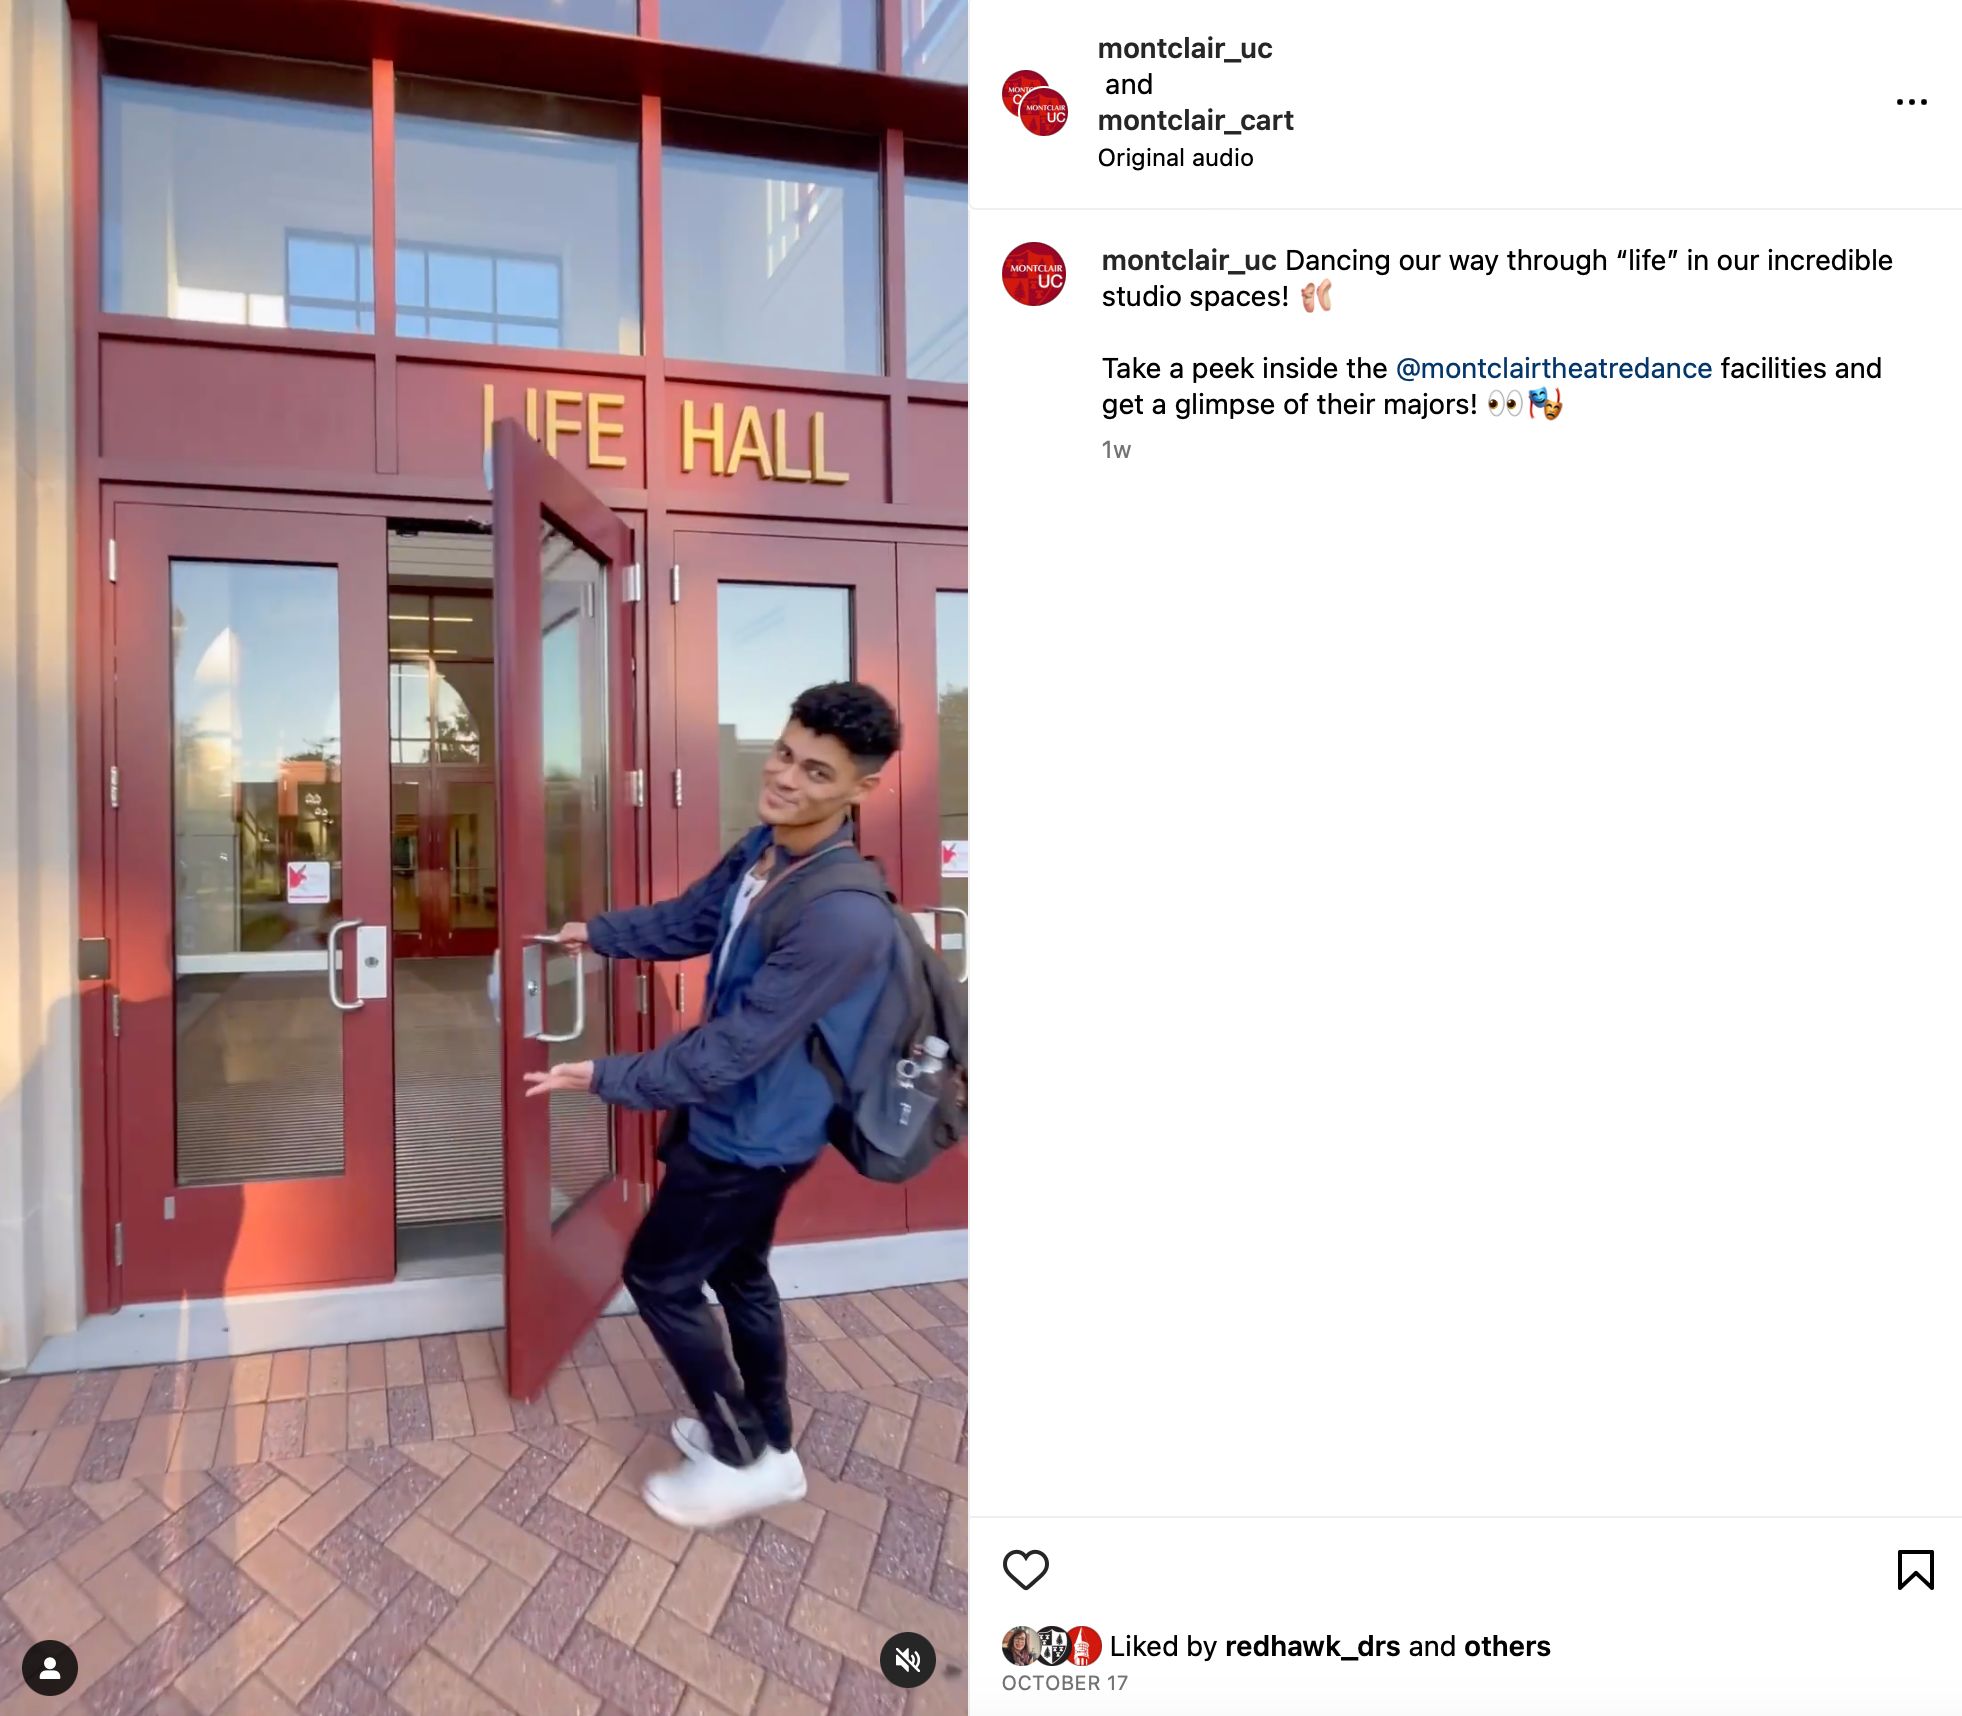 Screenshot of instagram video showing a quick tour of the various campus buildings